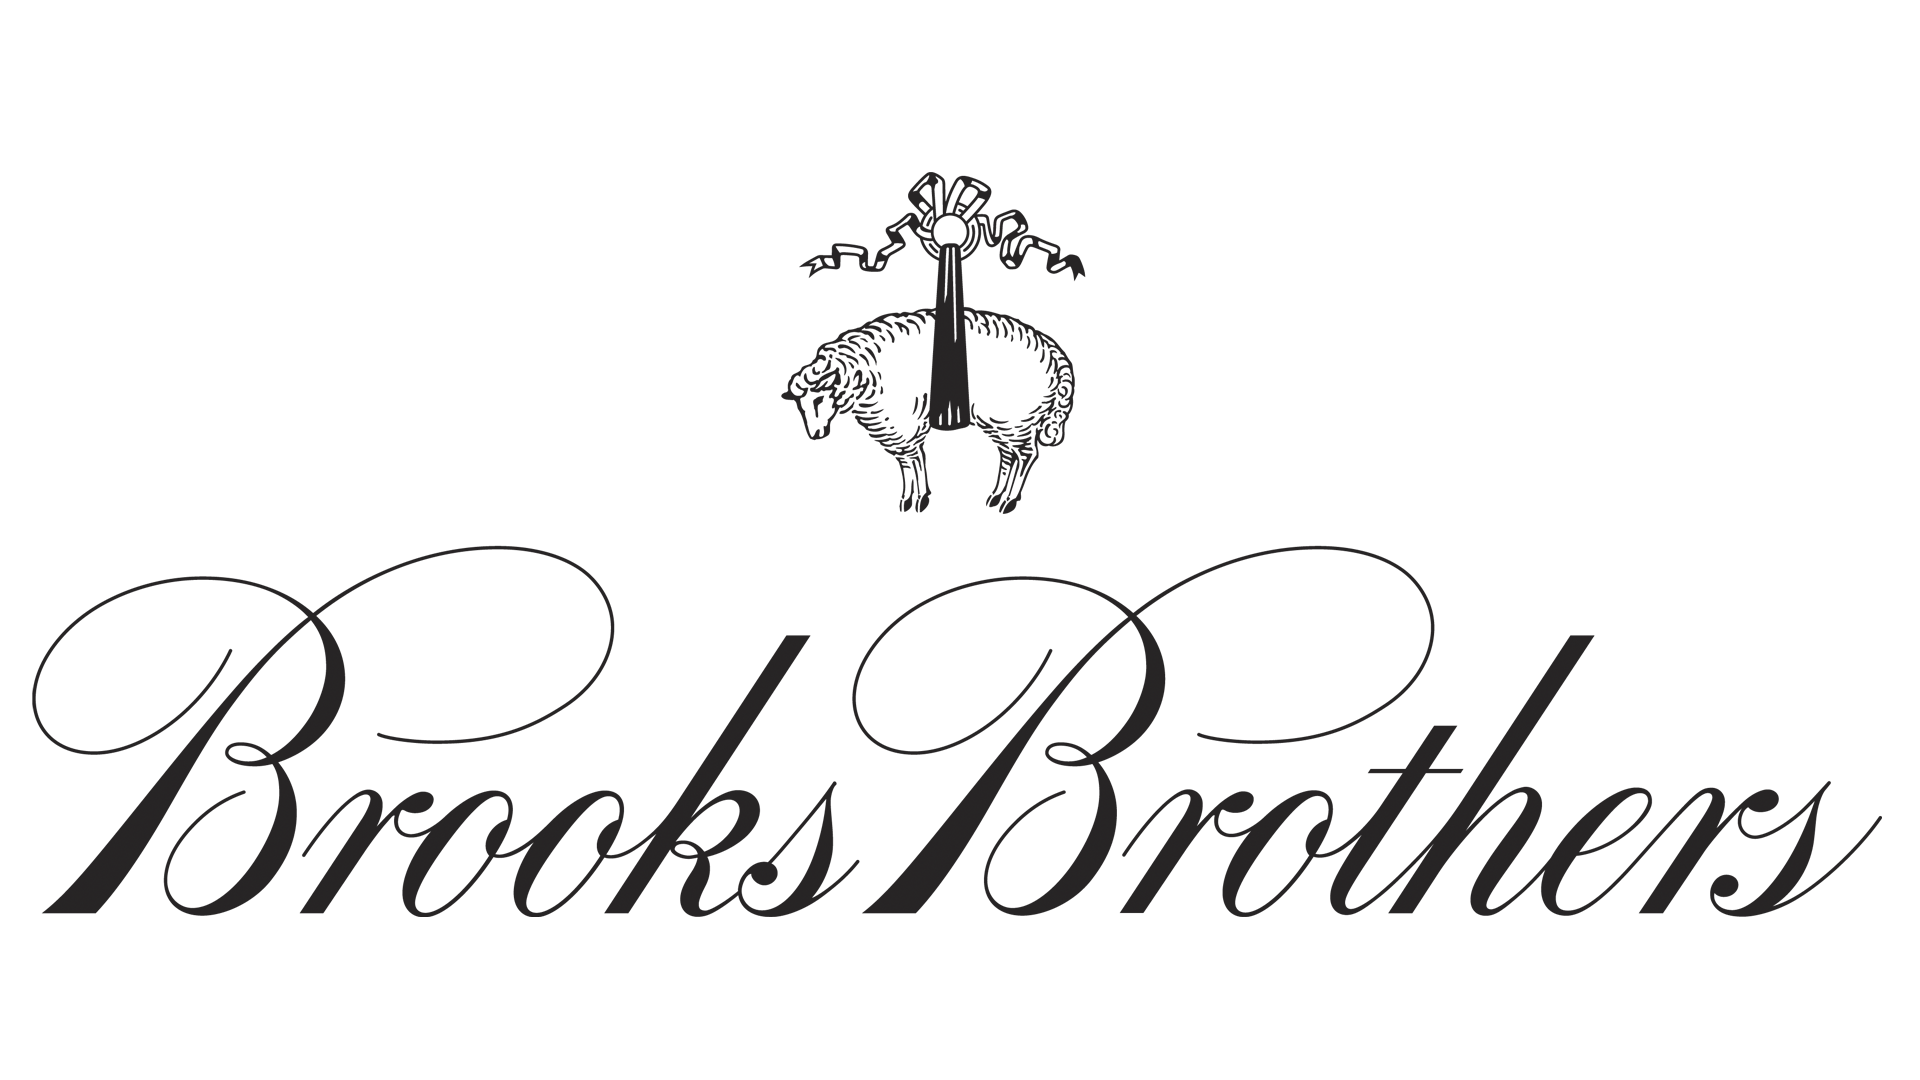 Brooks Brothers Coupons & Promo Codes